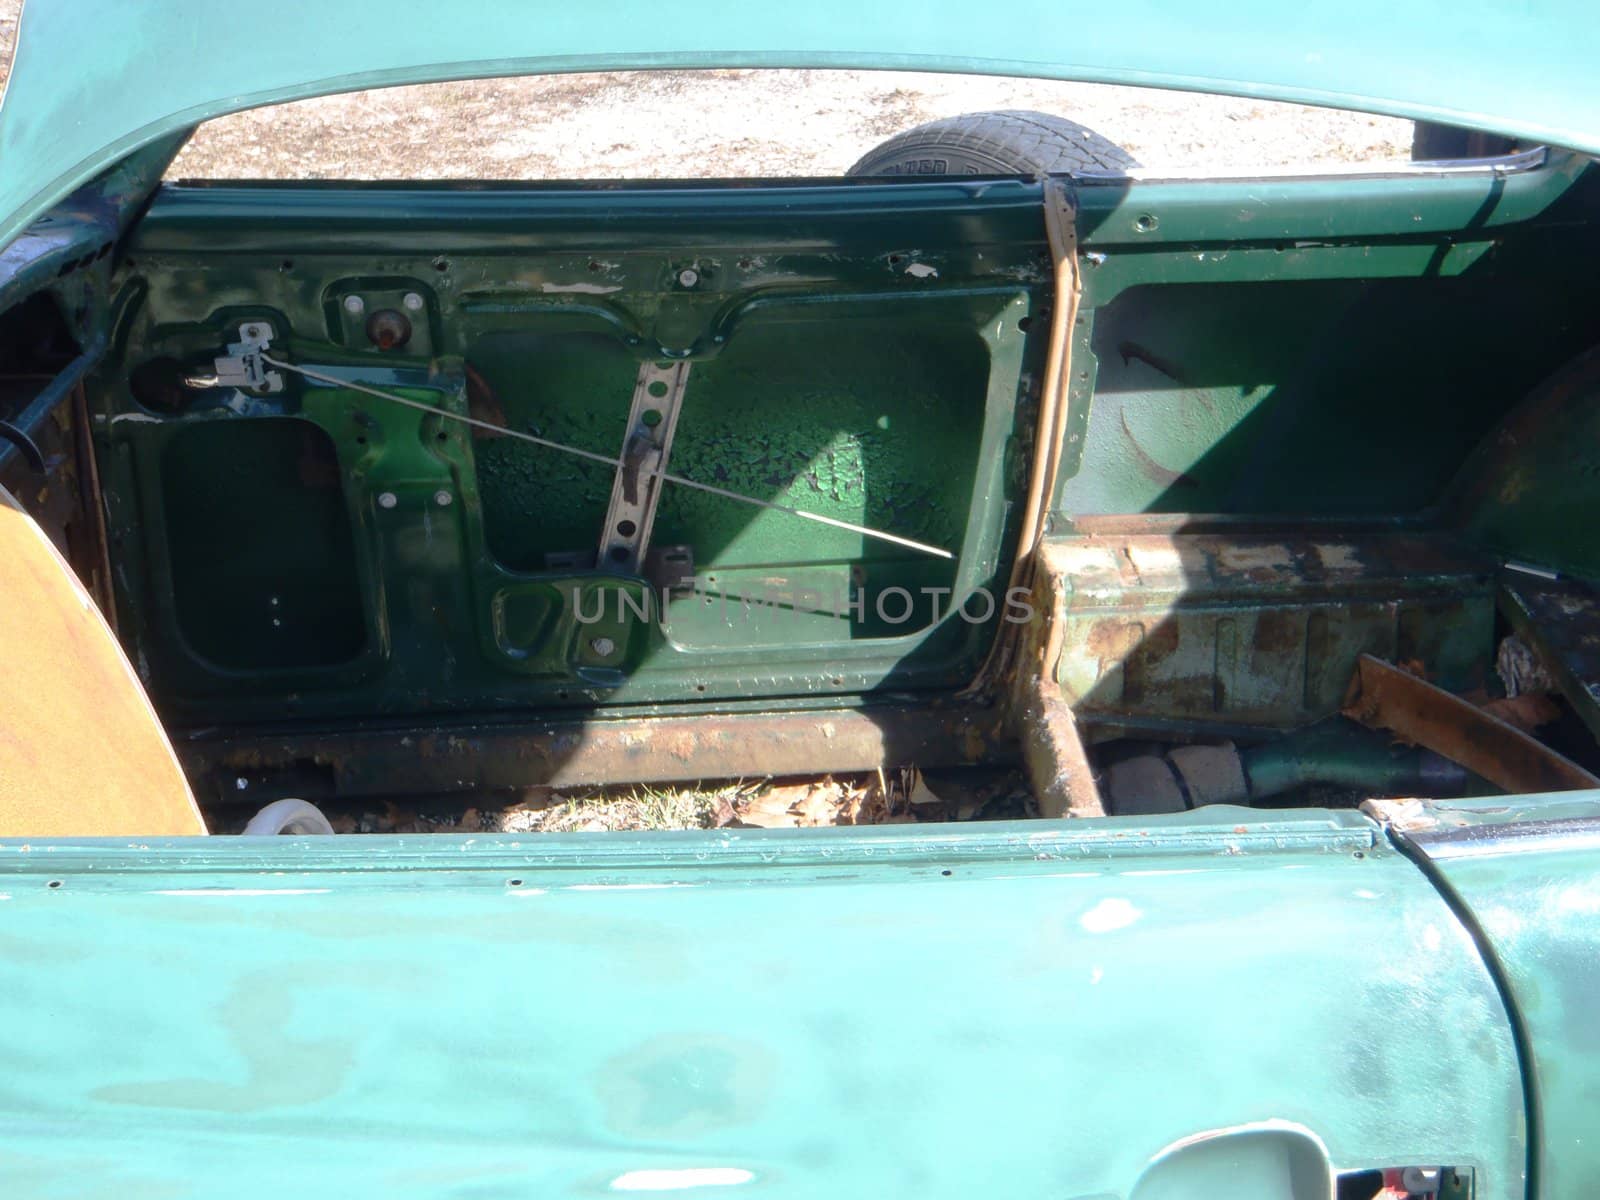 Classic car in pieces   by RefocusPhoto